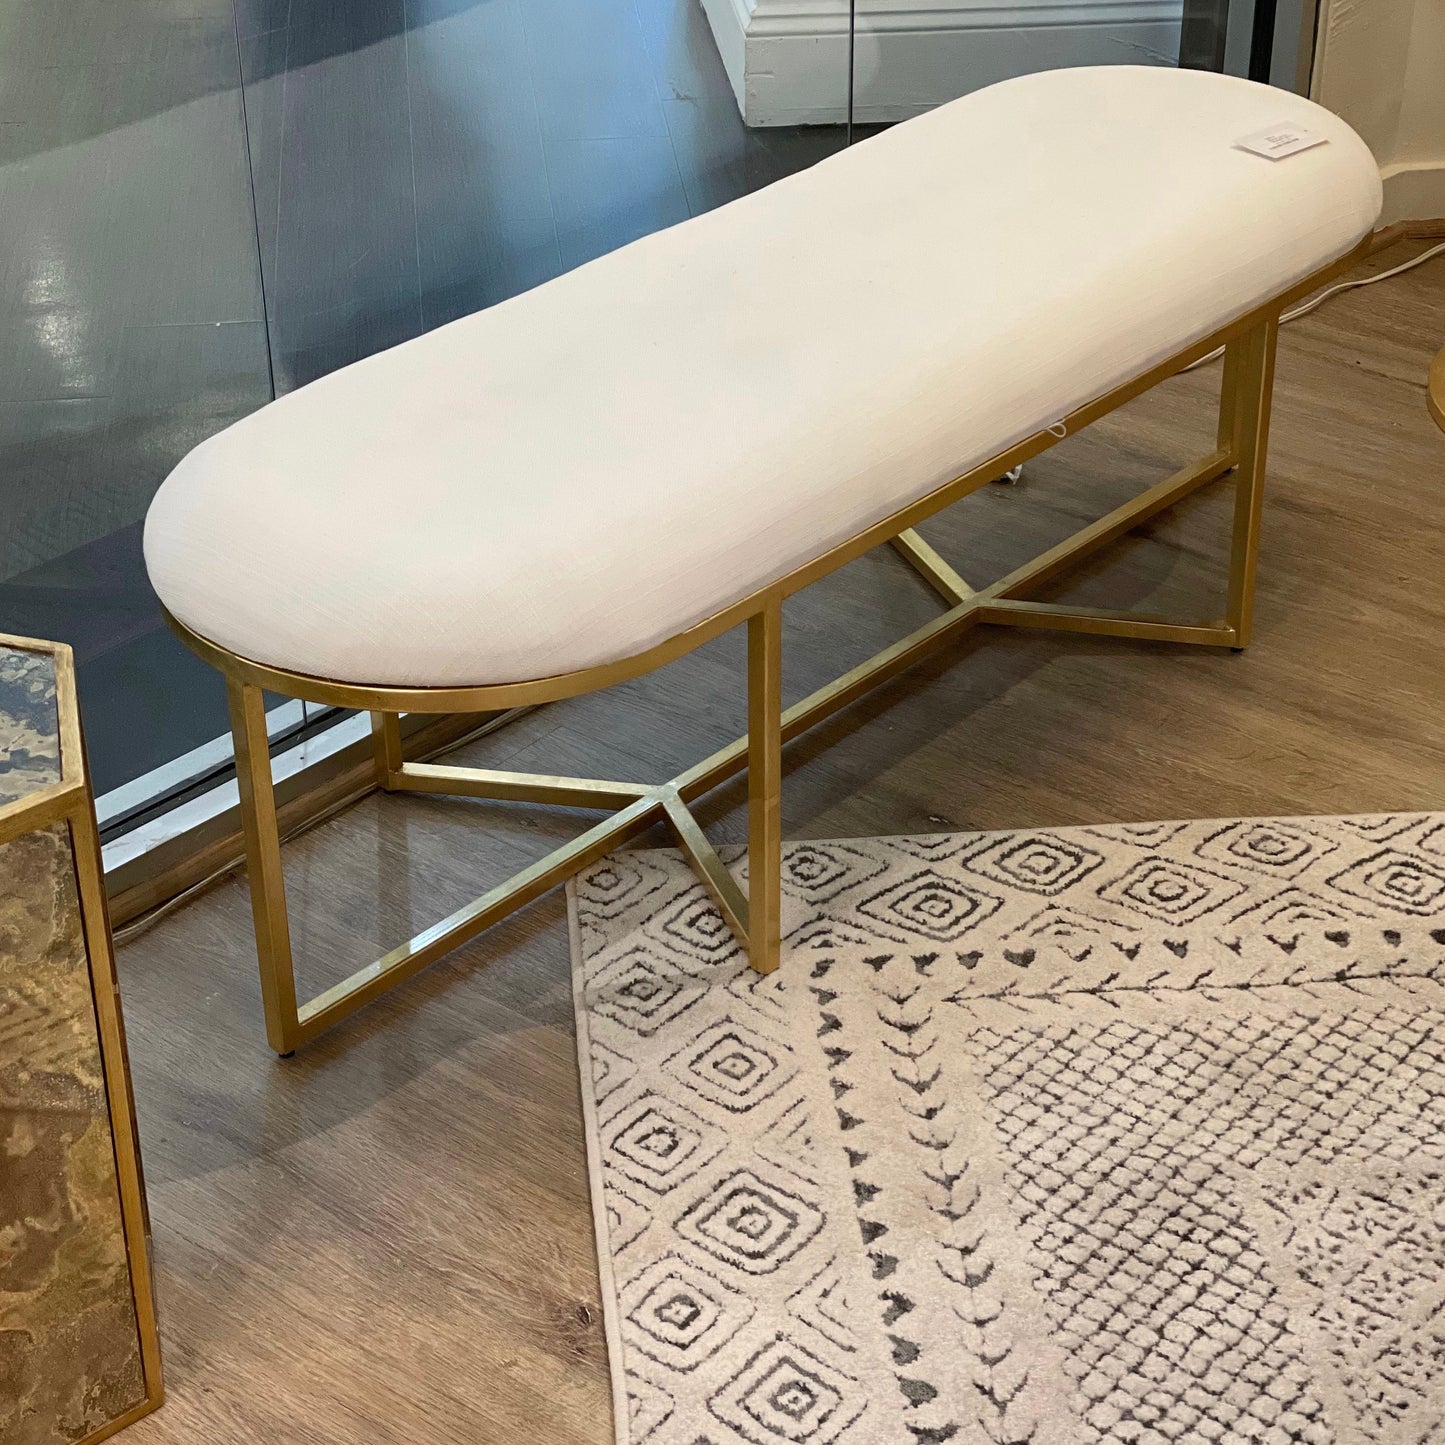 worlds away Tamia bench gold leaf showroom